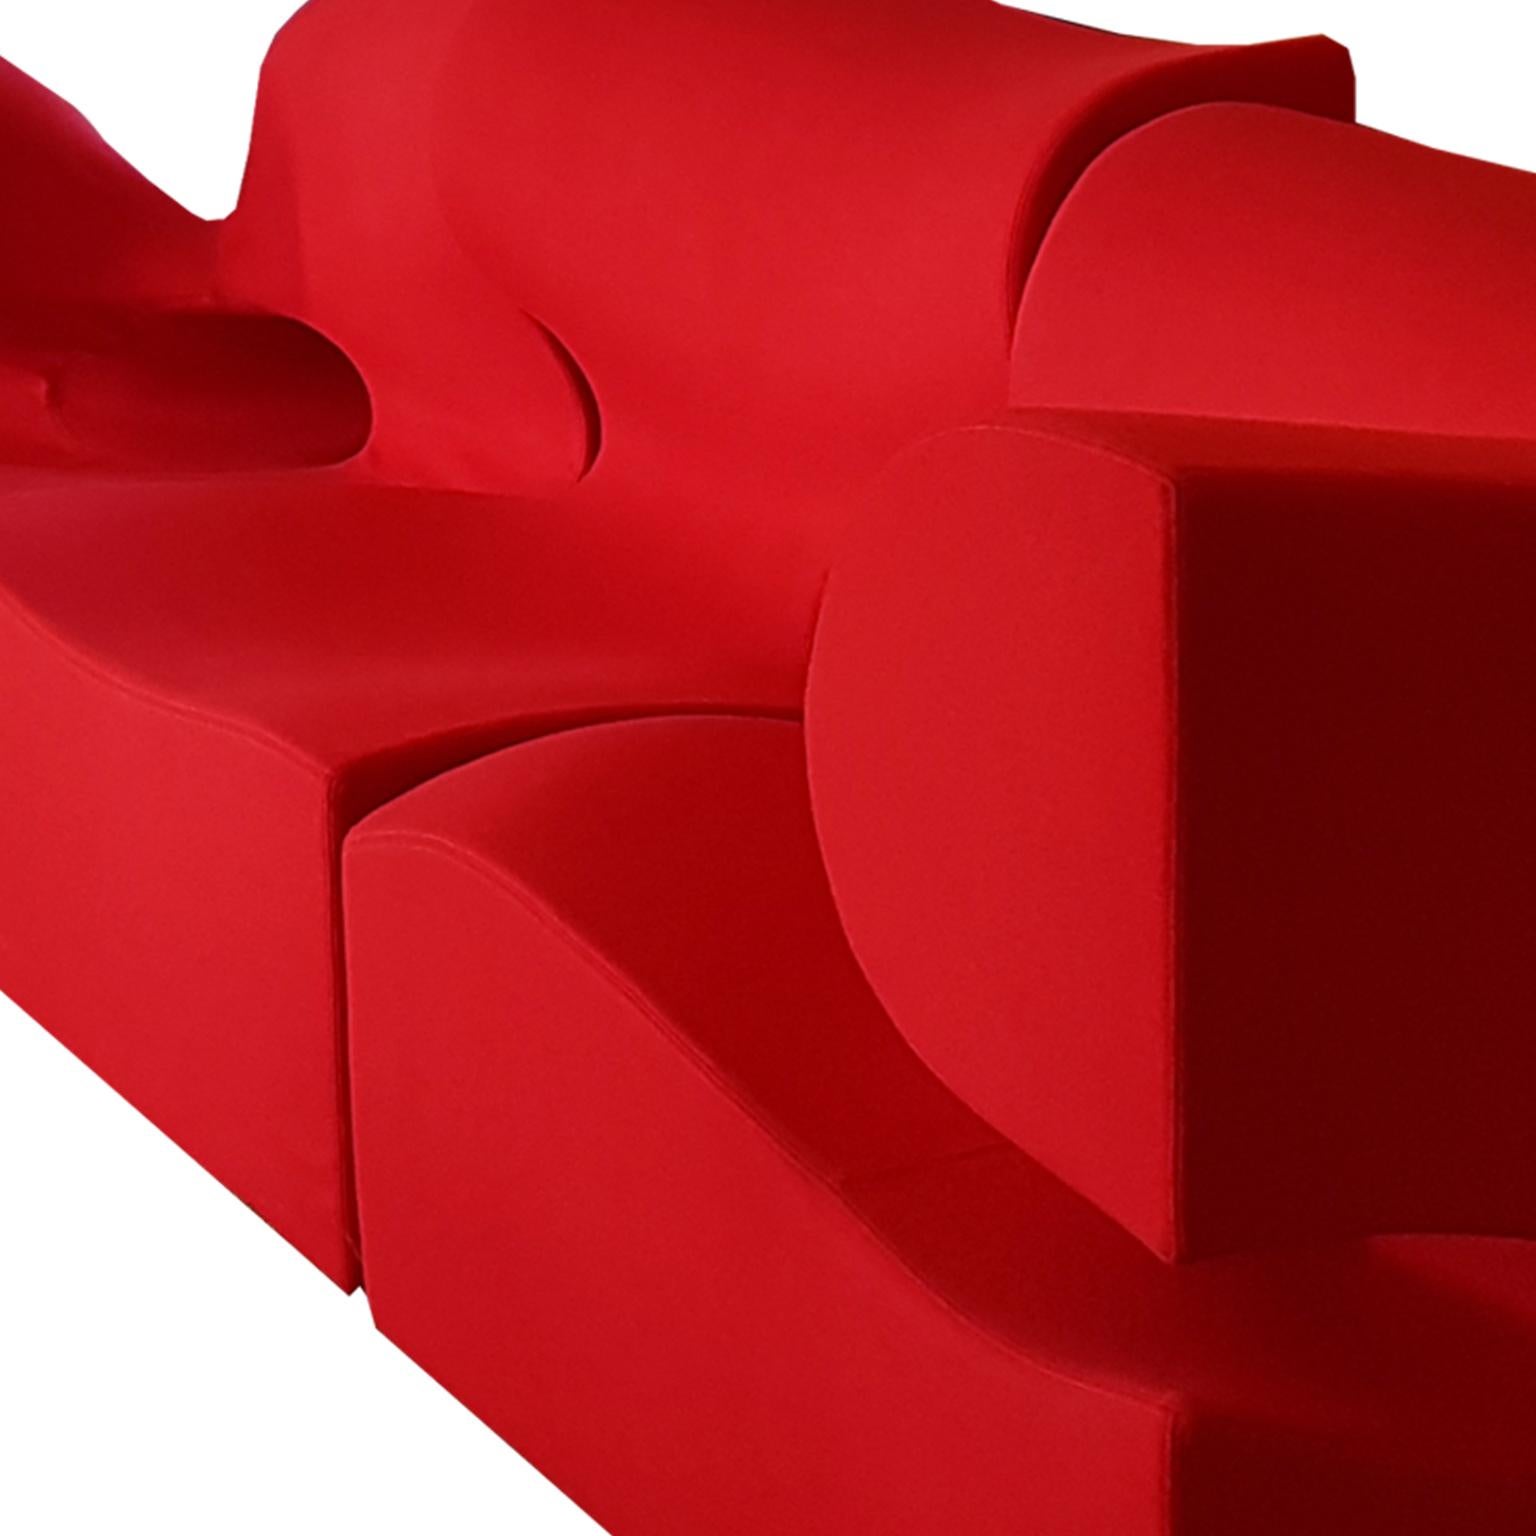 Contemporary Italian Moroso Modular Sofa with Red Wool Upholstery by Ron Arad For Sale 9